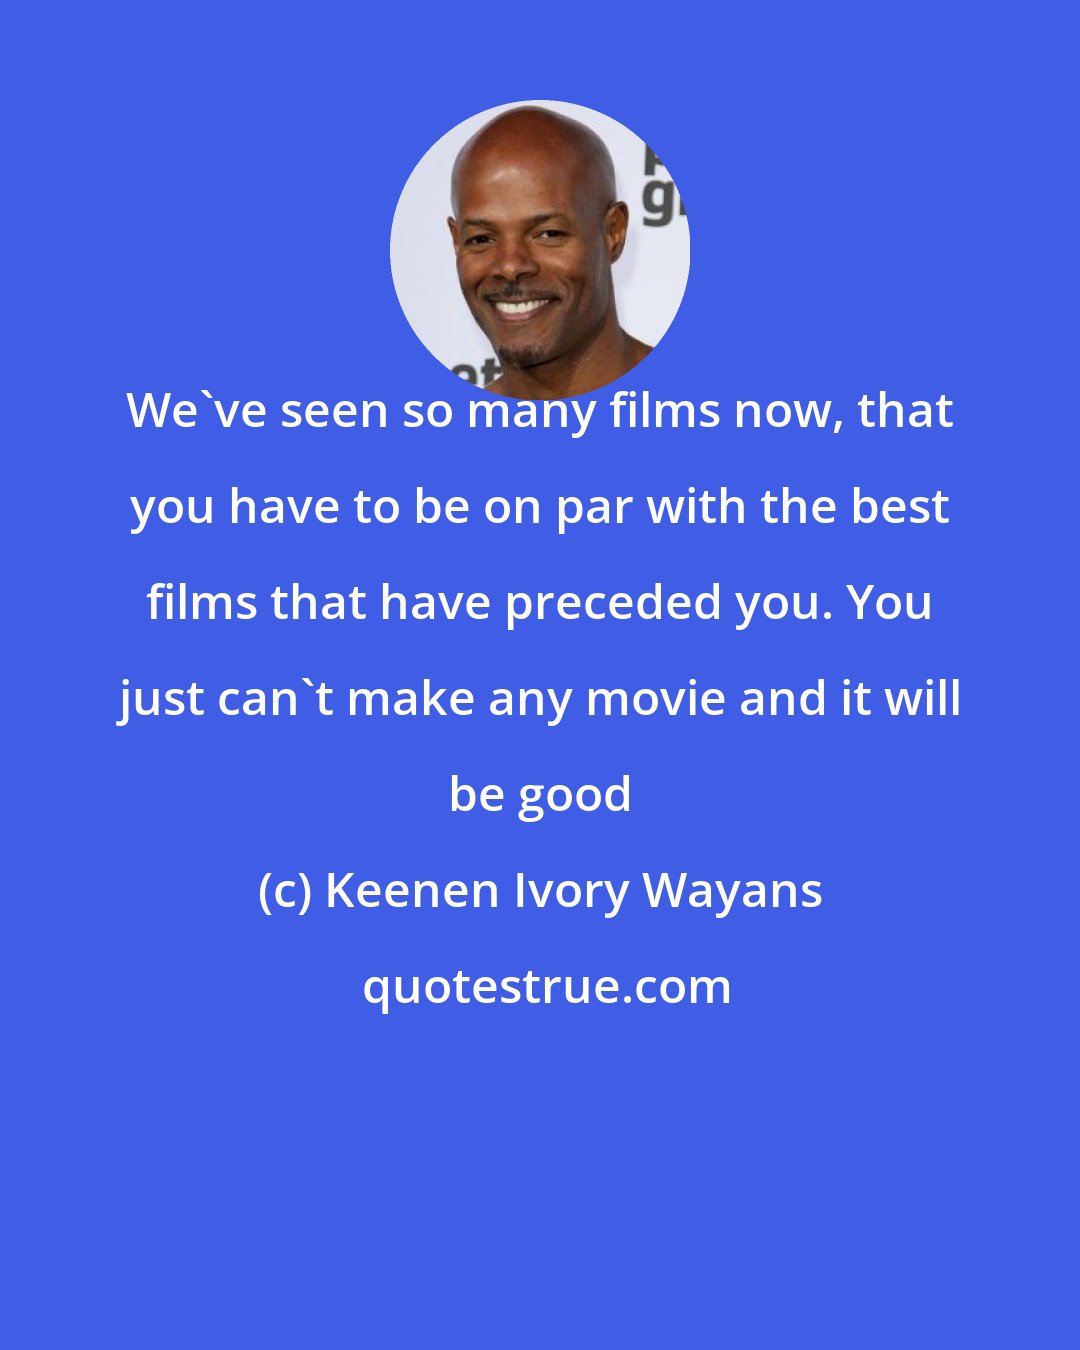 Keenen Ivory Wayans: We've seen so many films now, that you have to be on par with the best films that have preceded you. You just can't make any movie and it will be good